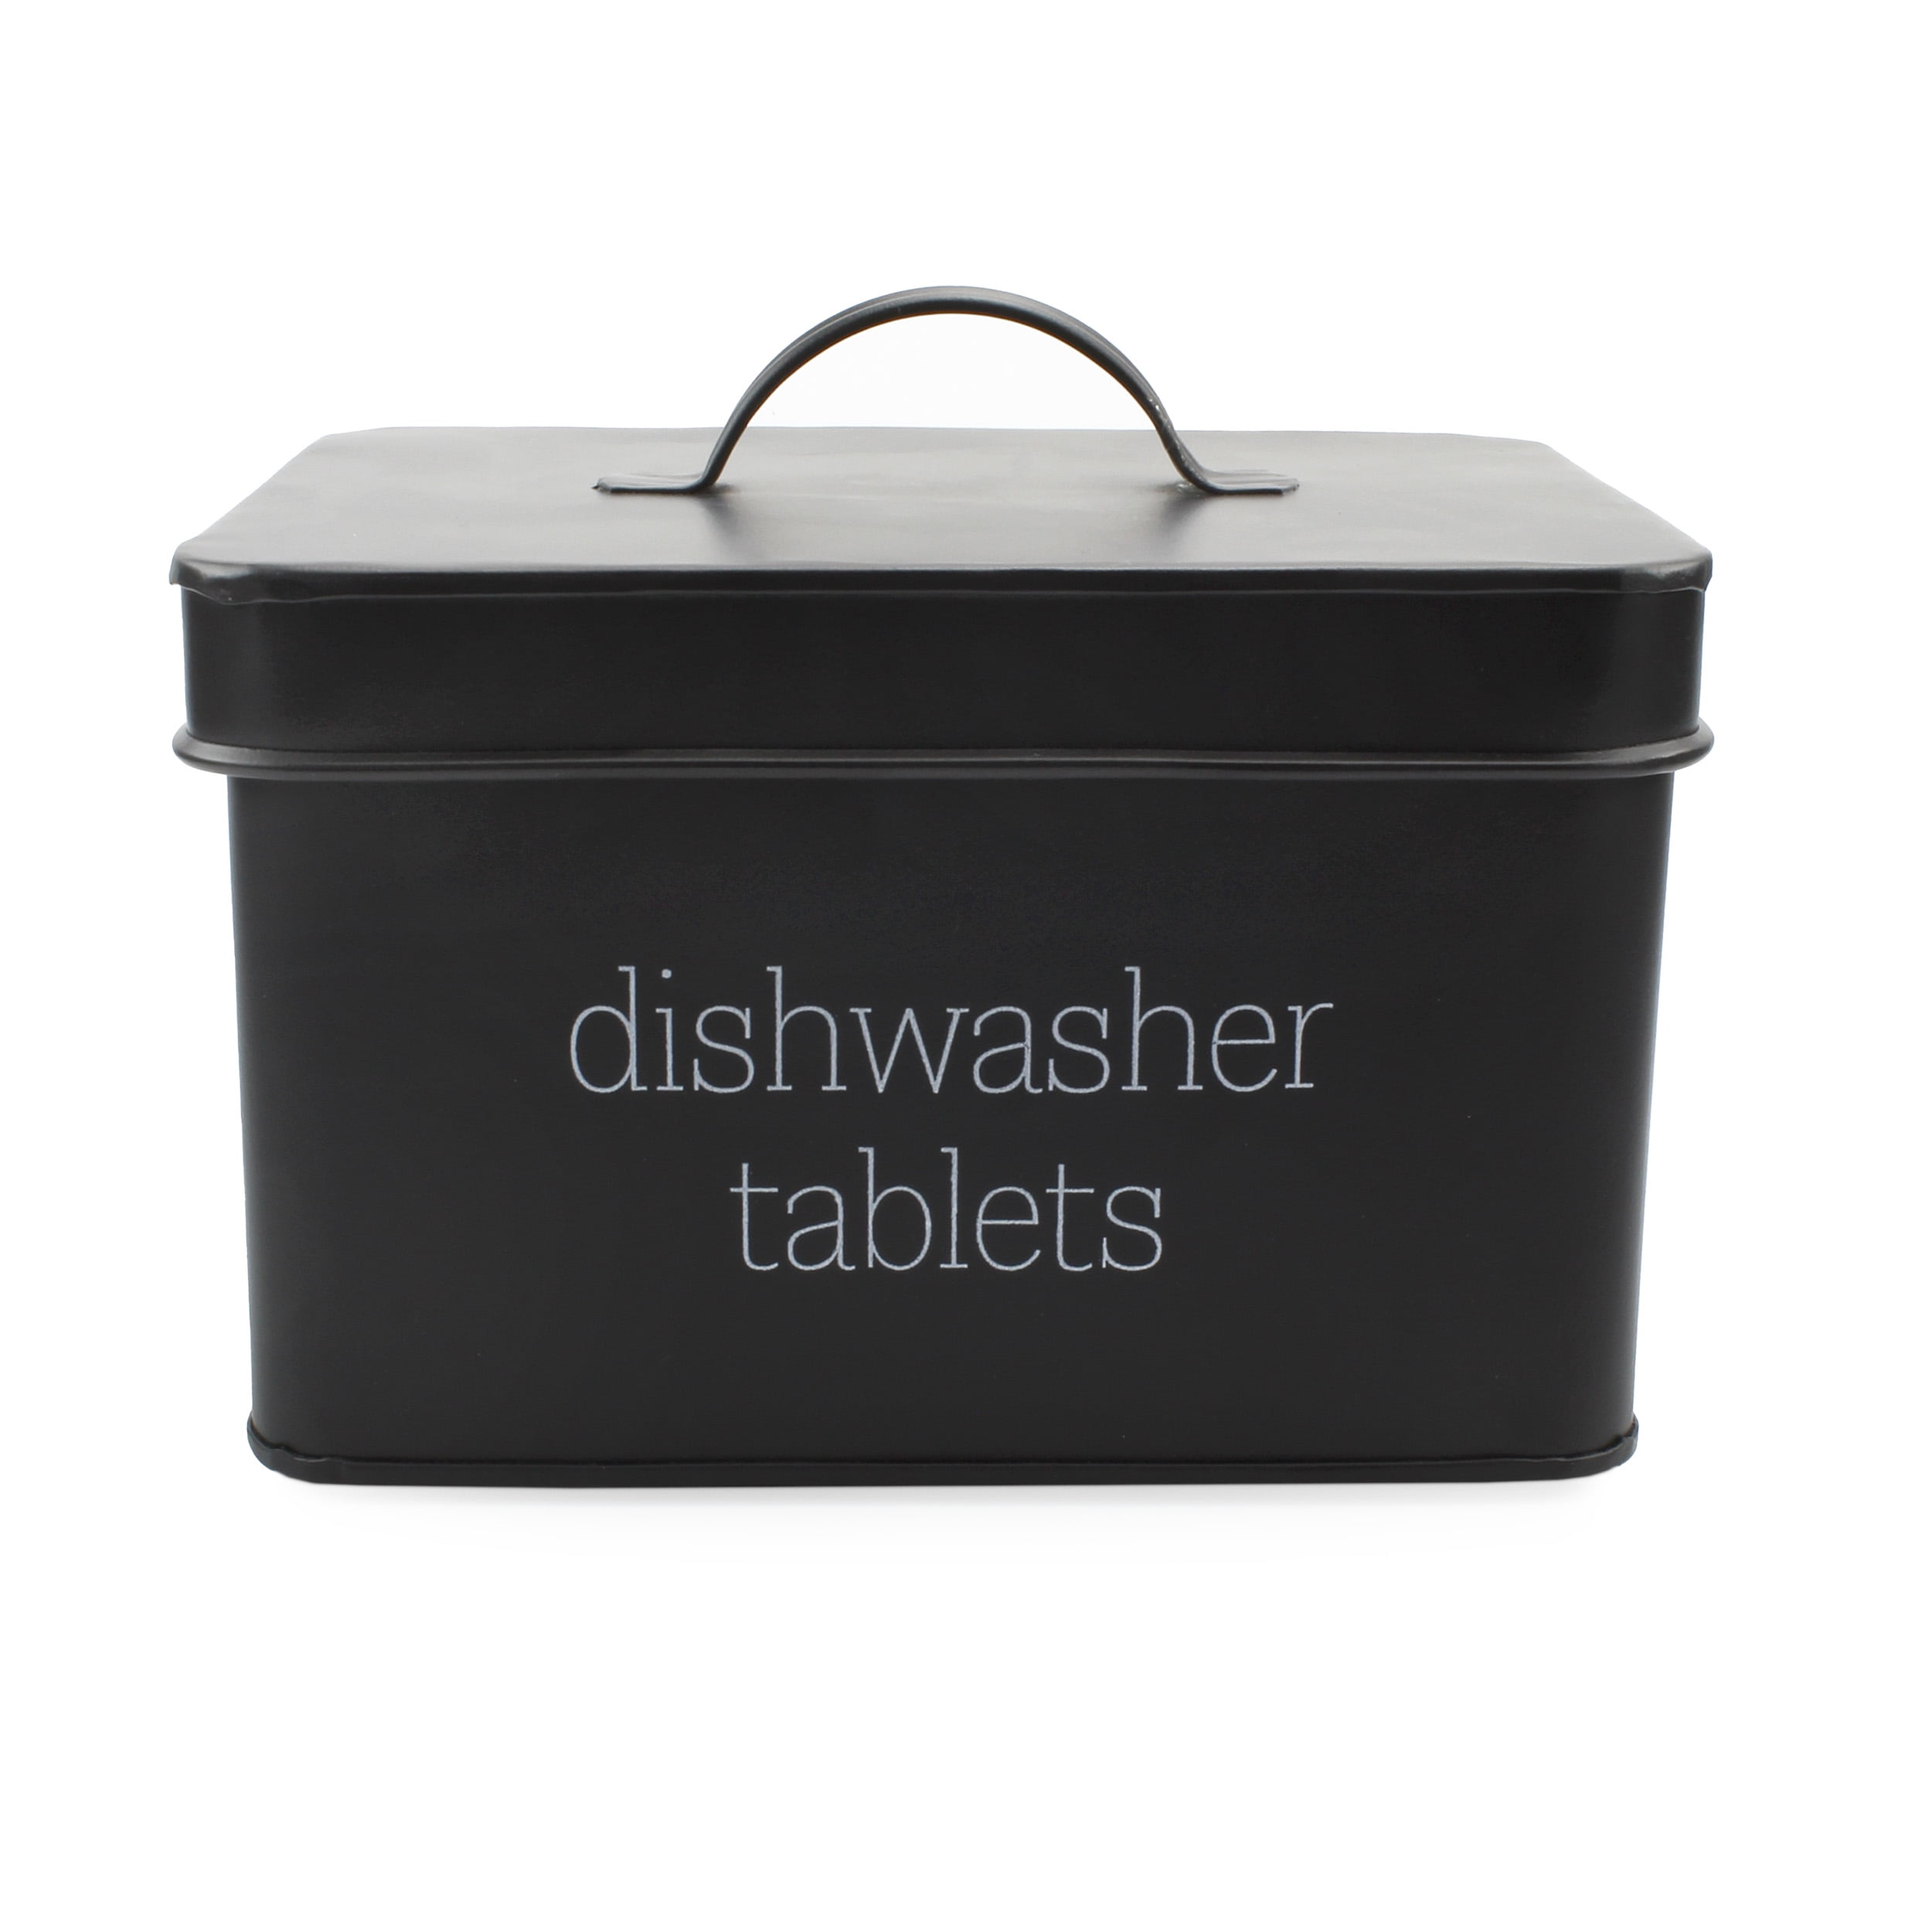  Farmhouse Dishwasher Pods Container with Lid – Metal Dishwasher  Pod Holder for Kitchen Organization, Dish Pods Storage Box Holds Over 100  Pacs : Appliances